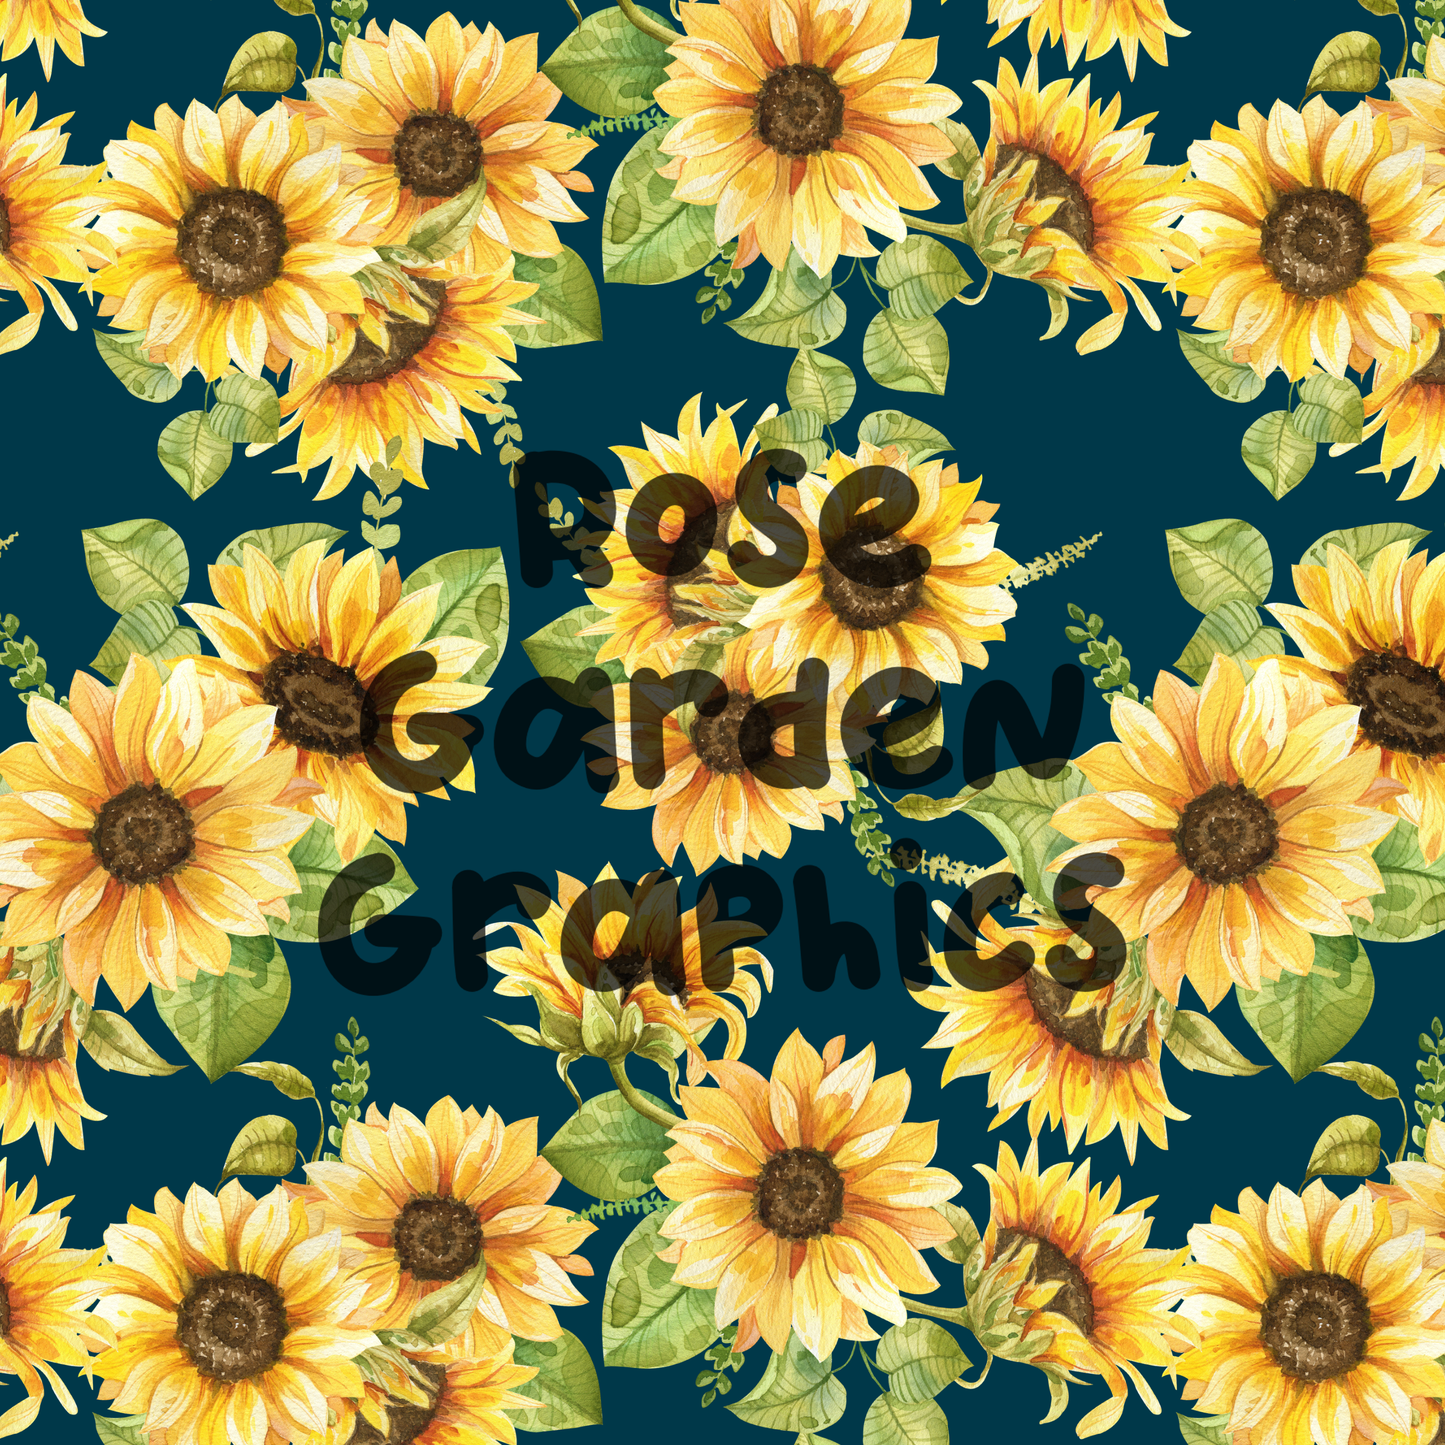 Sunflowers on Solids Seamless Image Collection